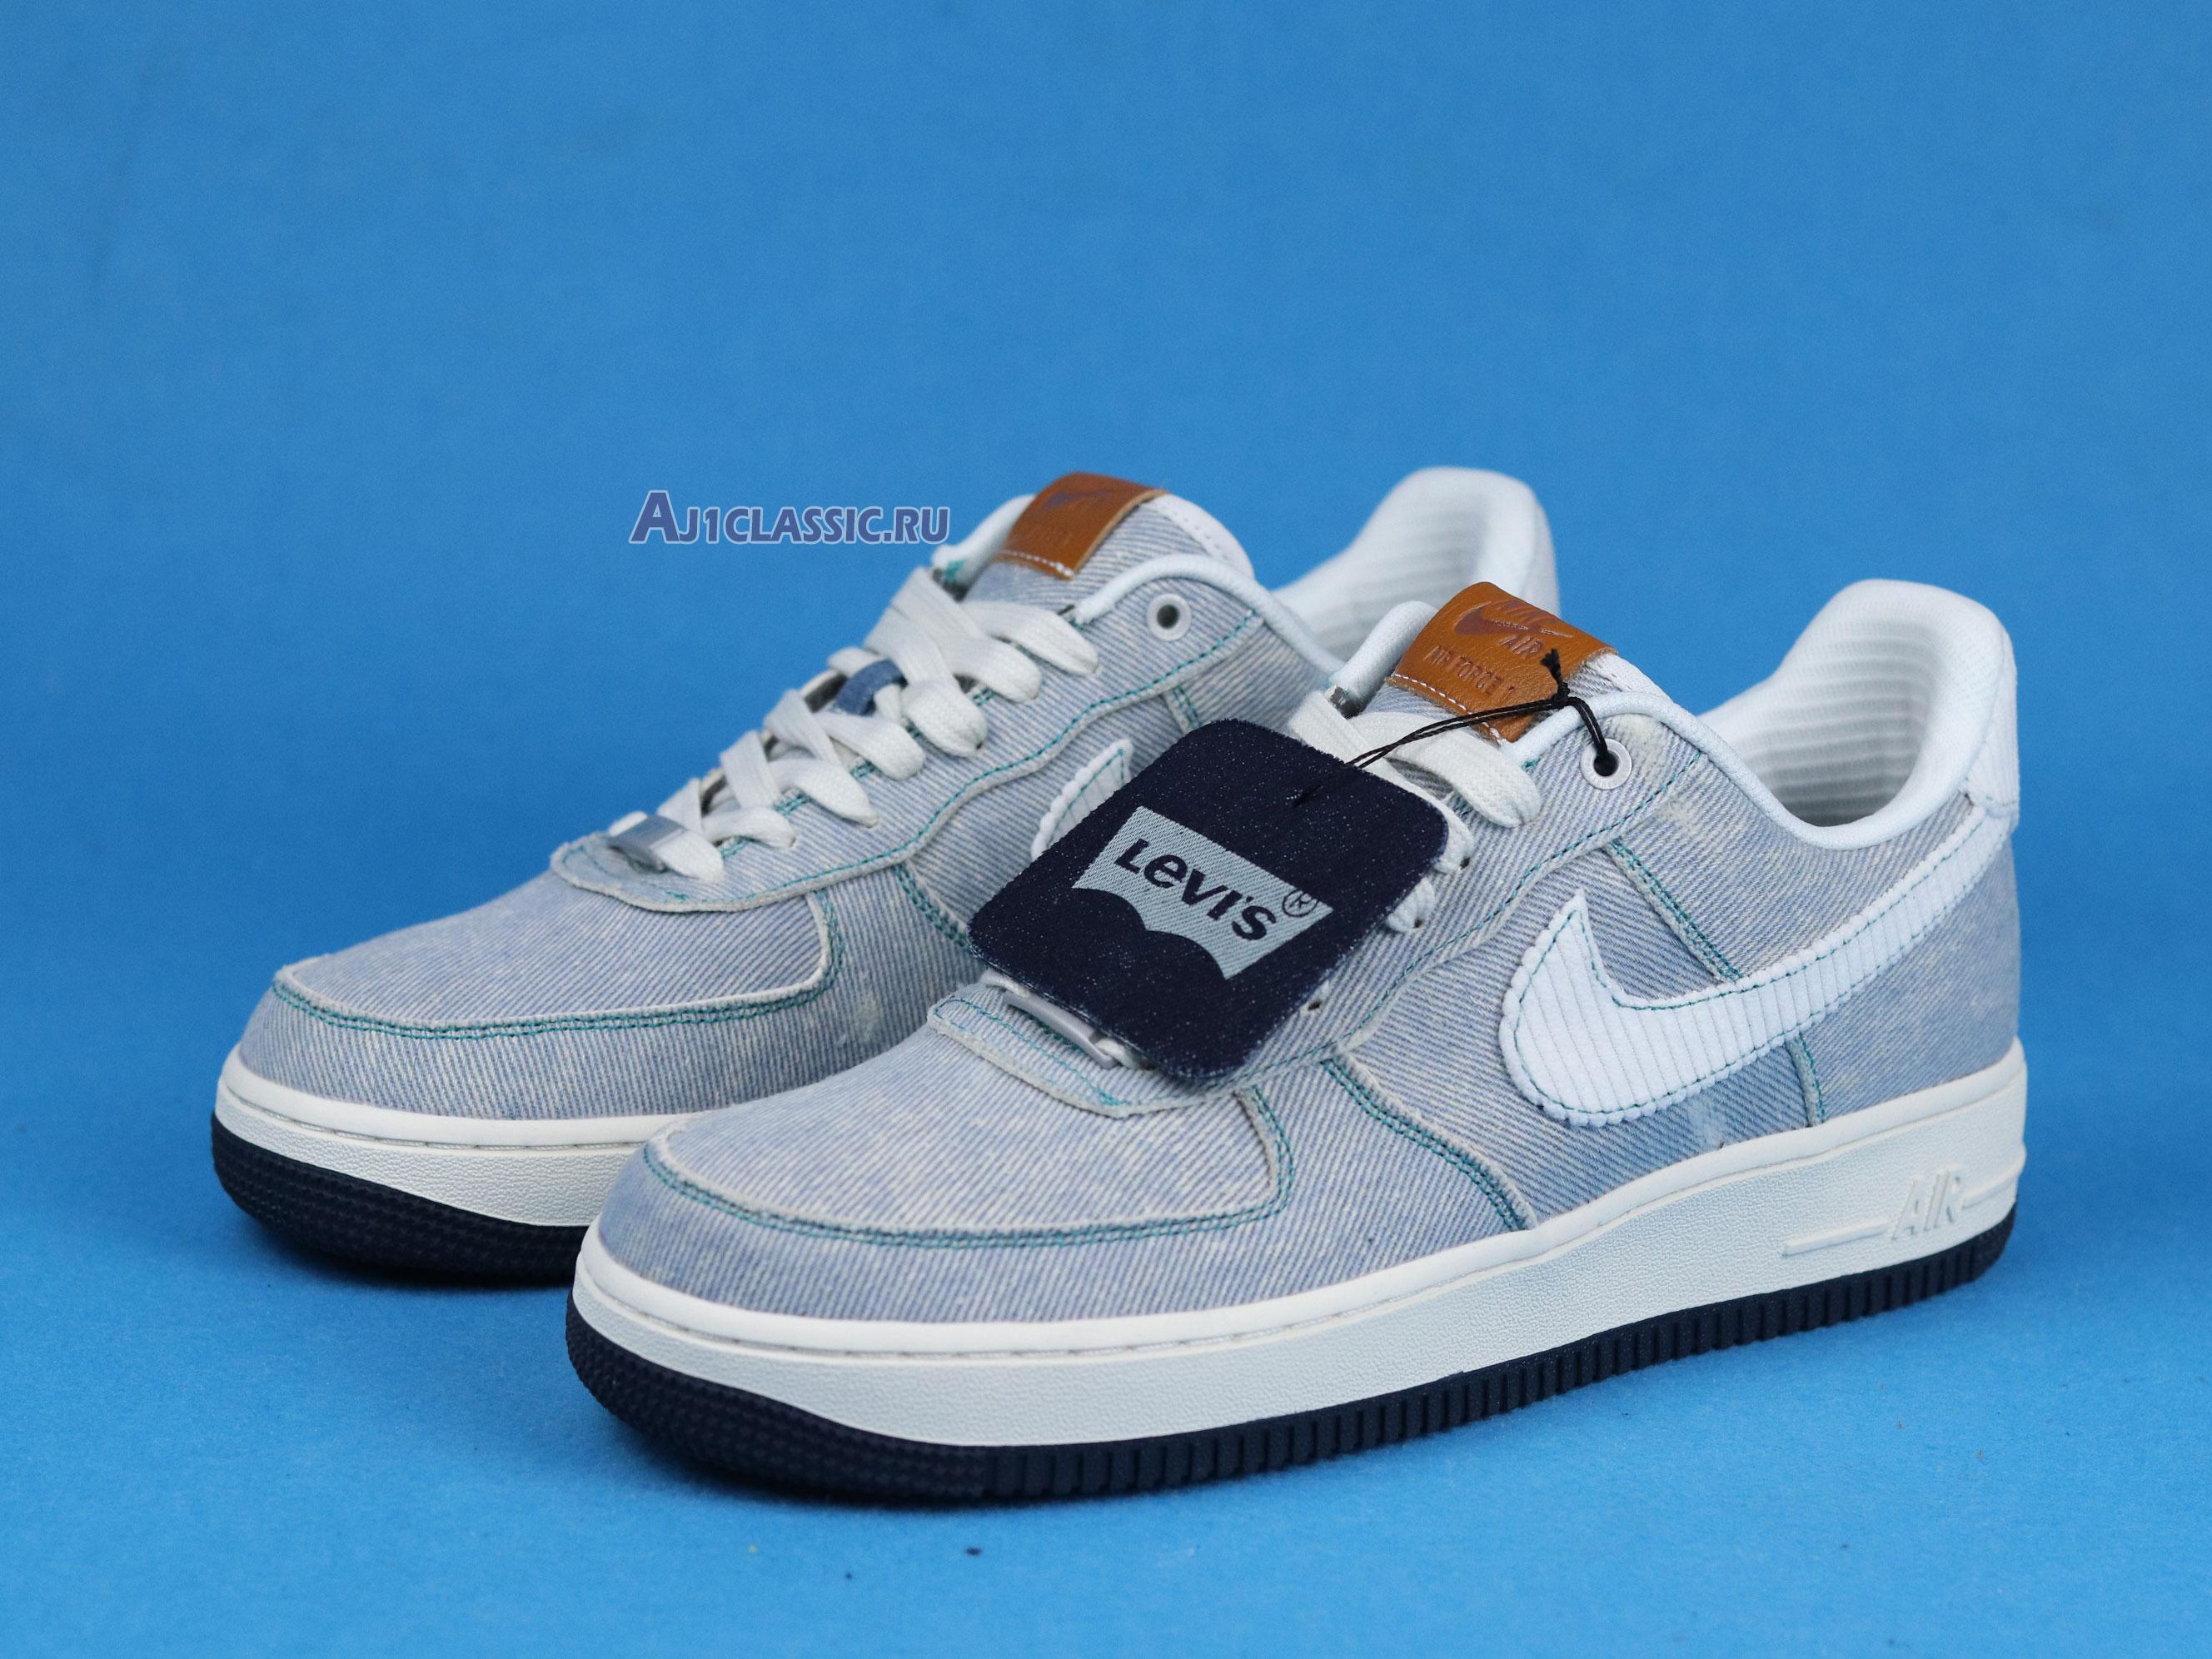 Levis Denim Blue X Nike Air Force 1 Low "Nike By You" CI5766-994